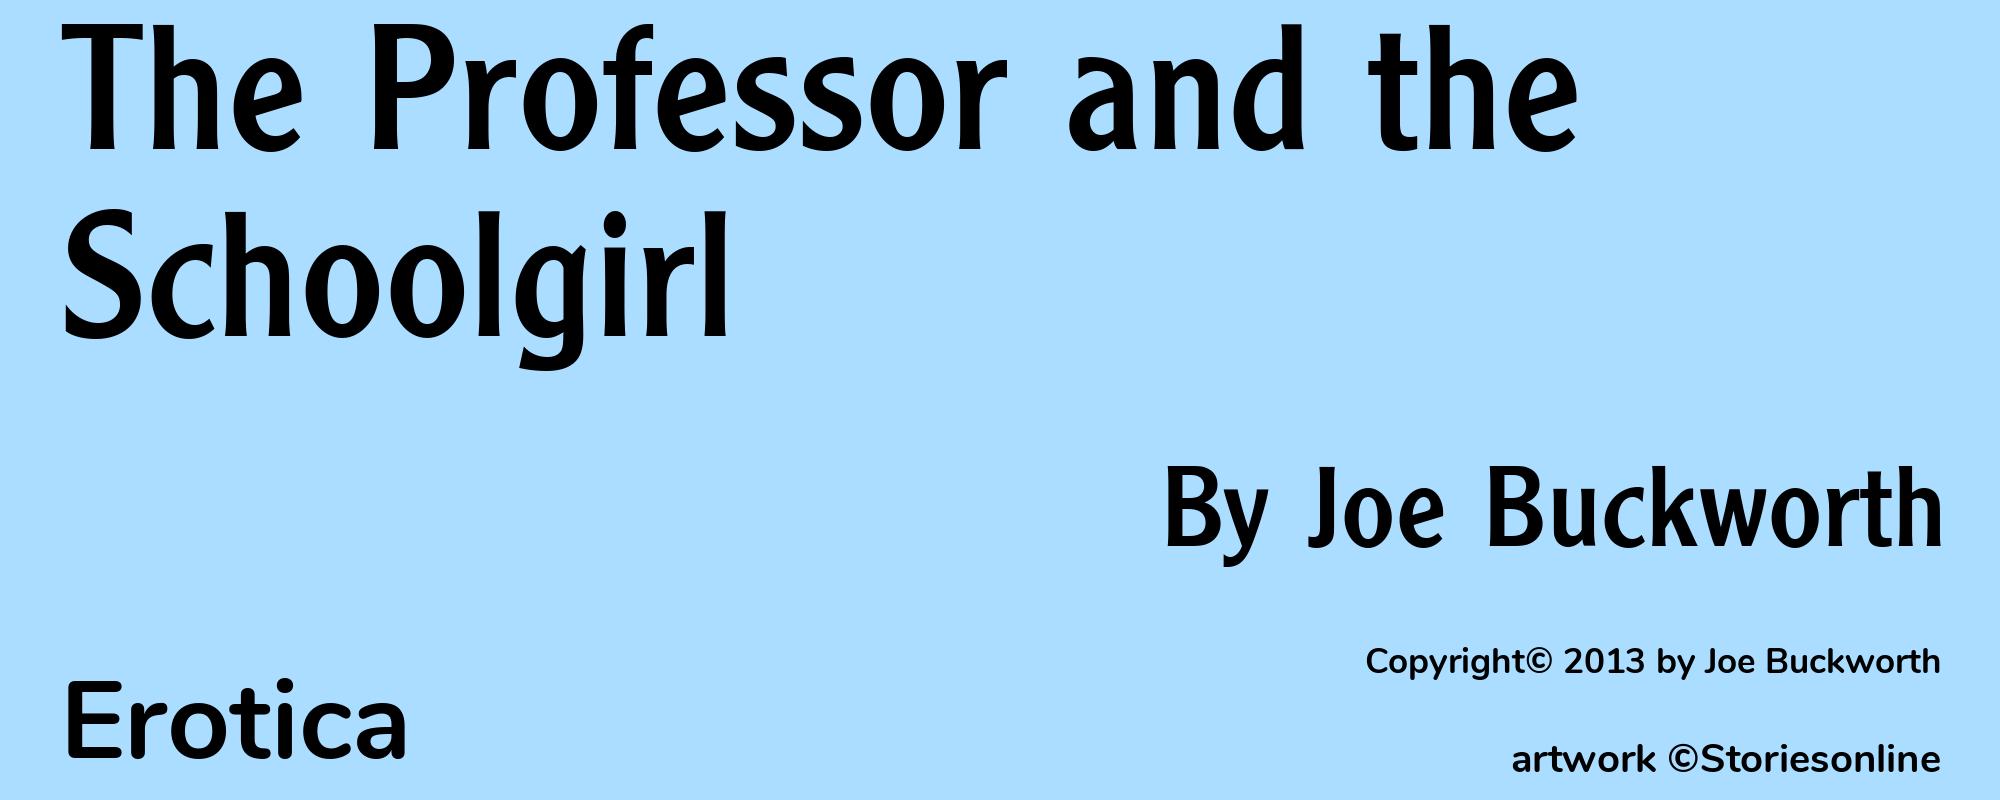 The Professor and the Schoolgirl - Cover